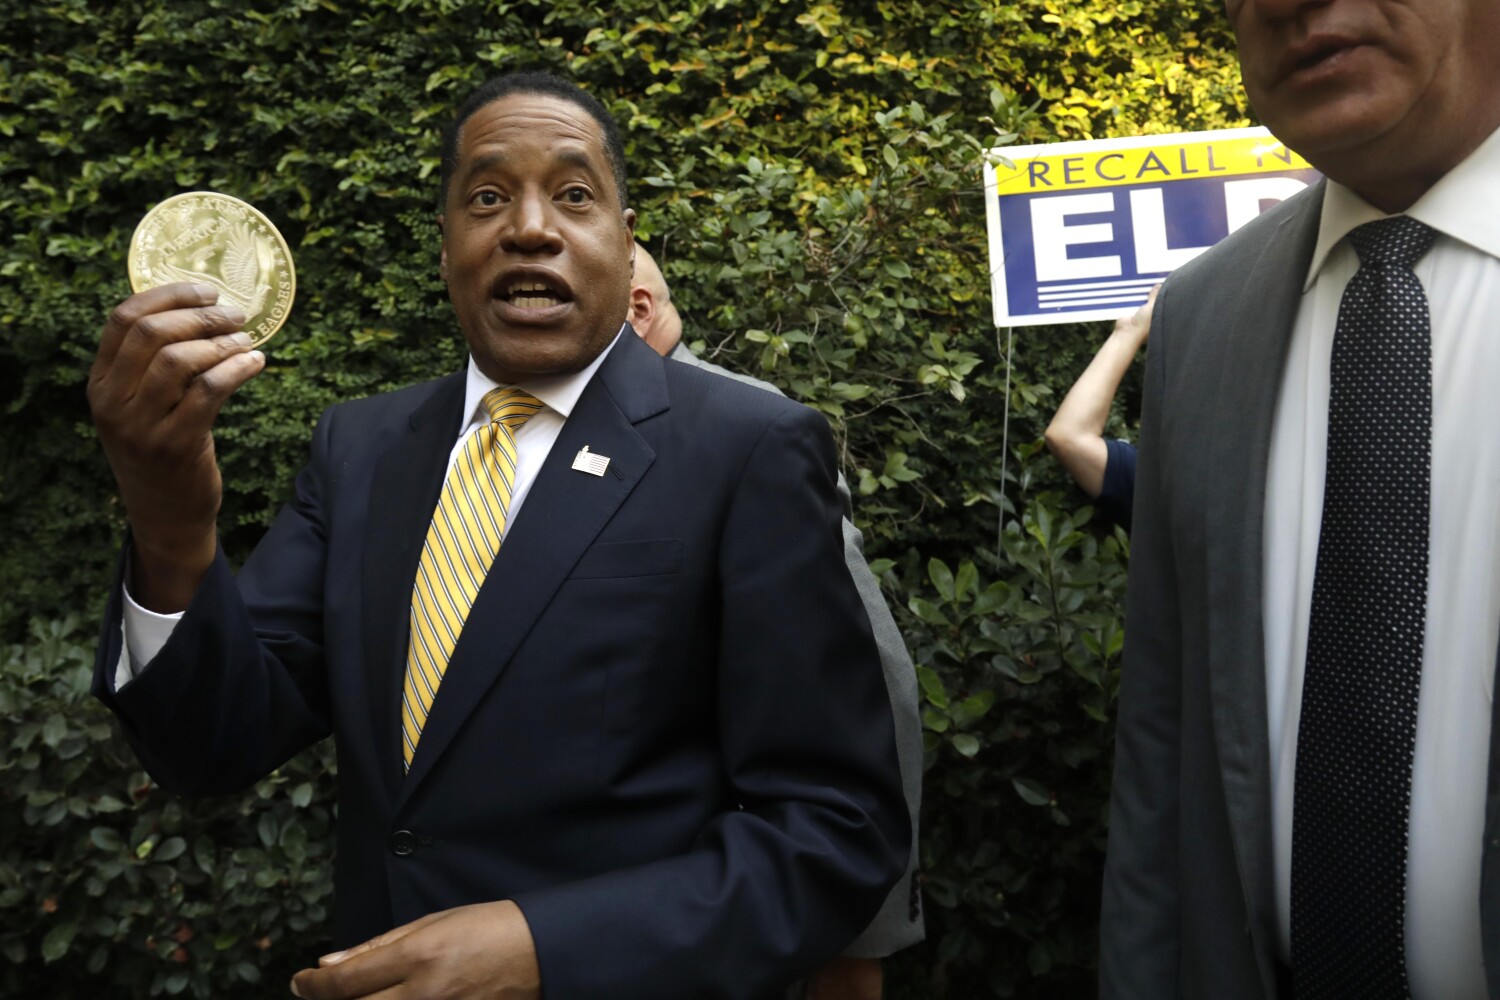 Column: Larry Elder says he's not a face of white supremacy. His fans make it hard to believe